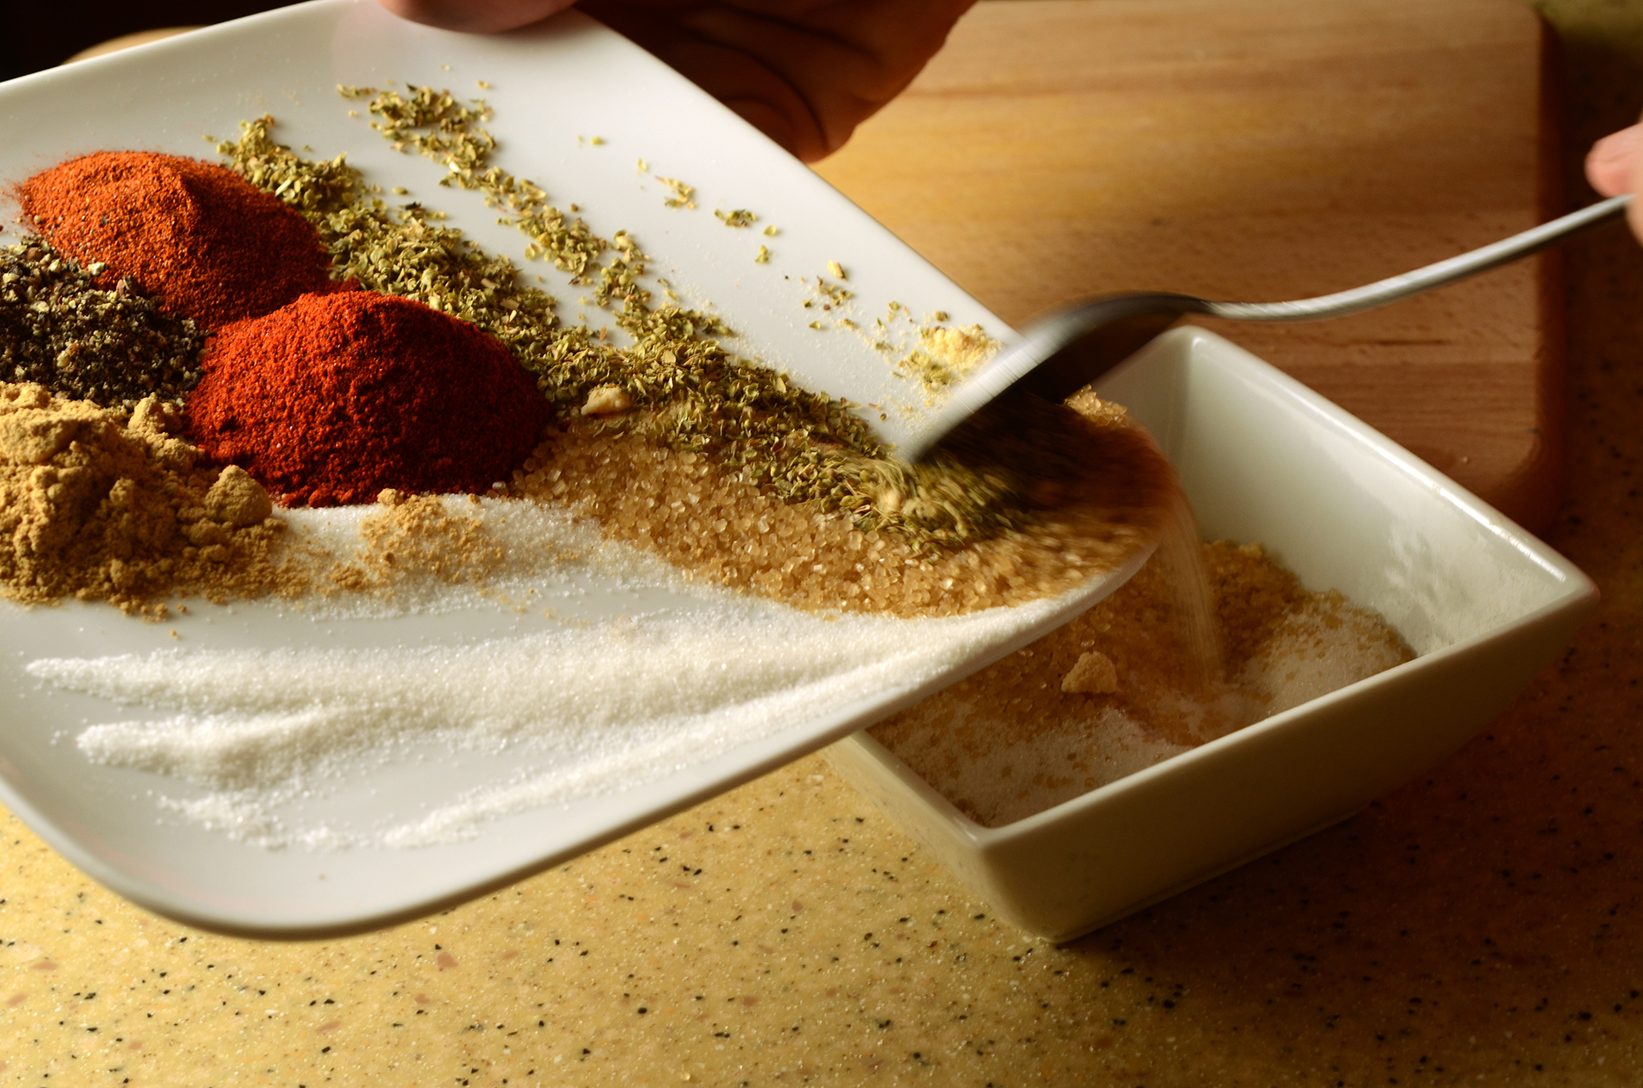 Spices and salt mixed together